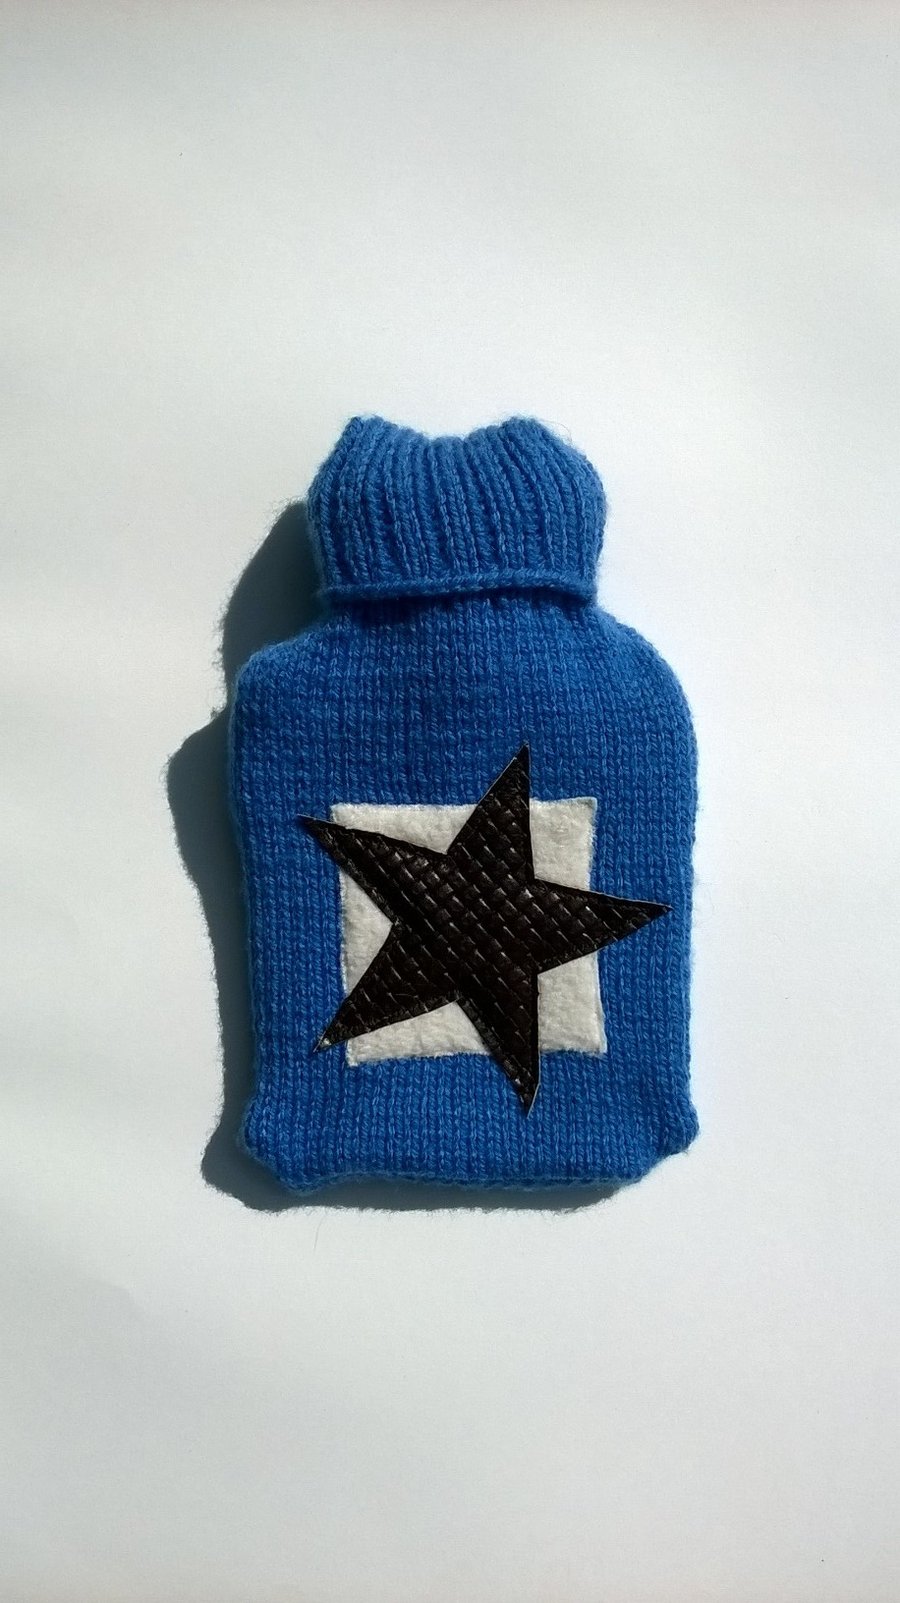 SALE : Hot water bottle cover  - blue with leather star